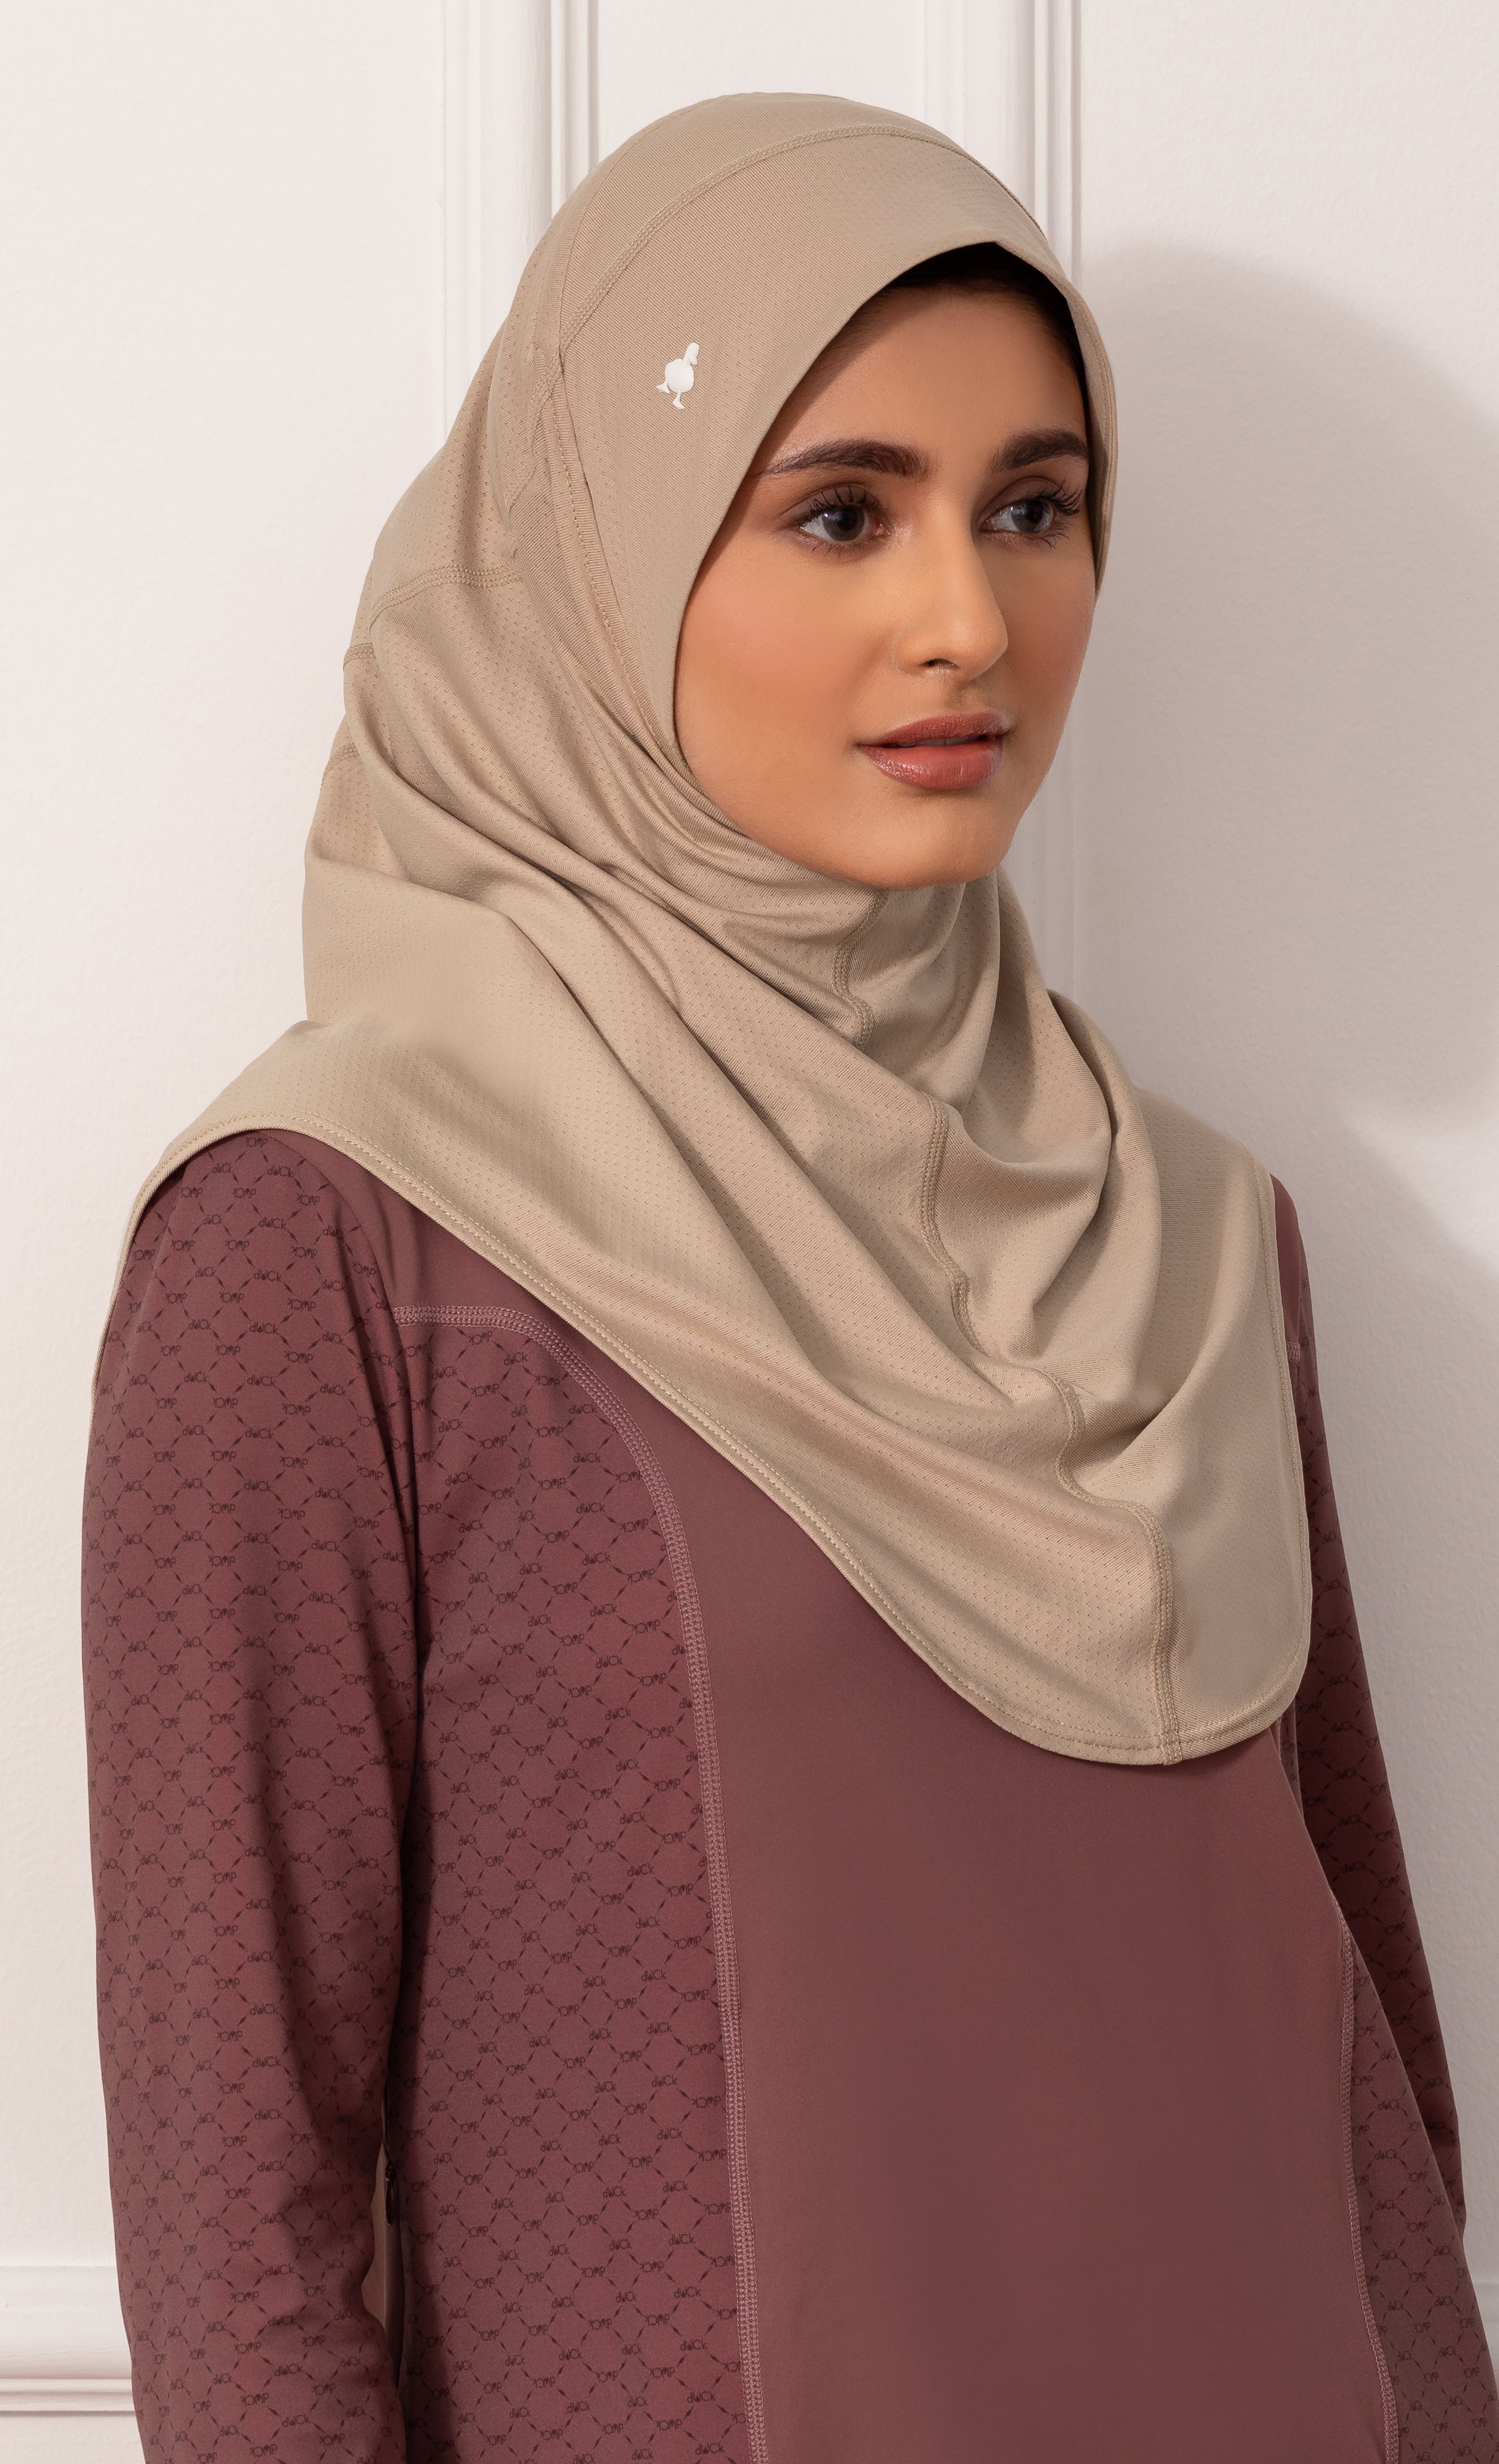 The Sporty dUCk Leisure Scarf in Nude